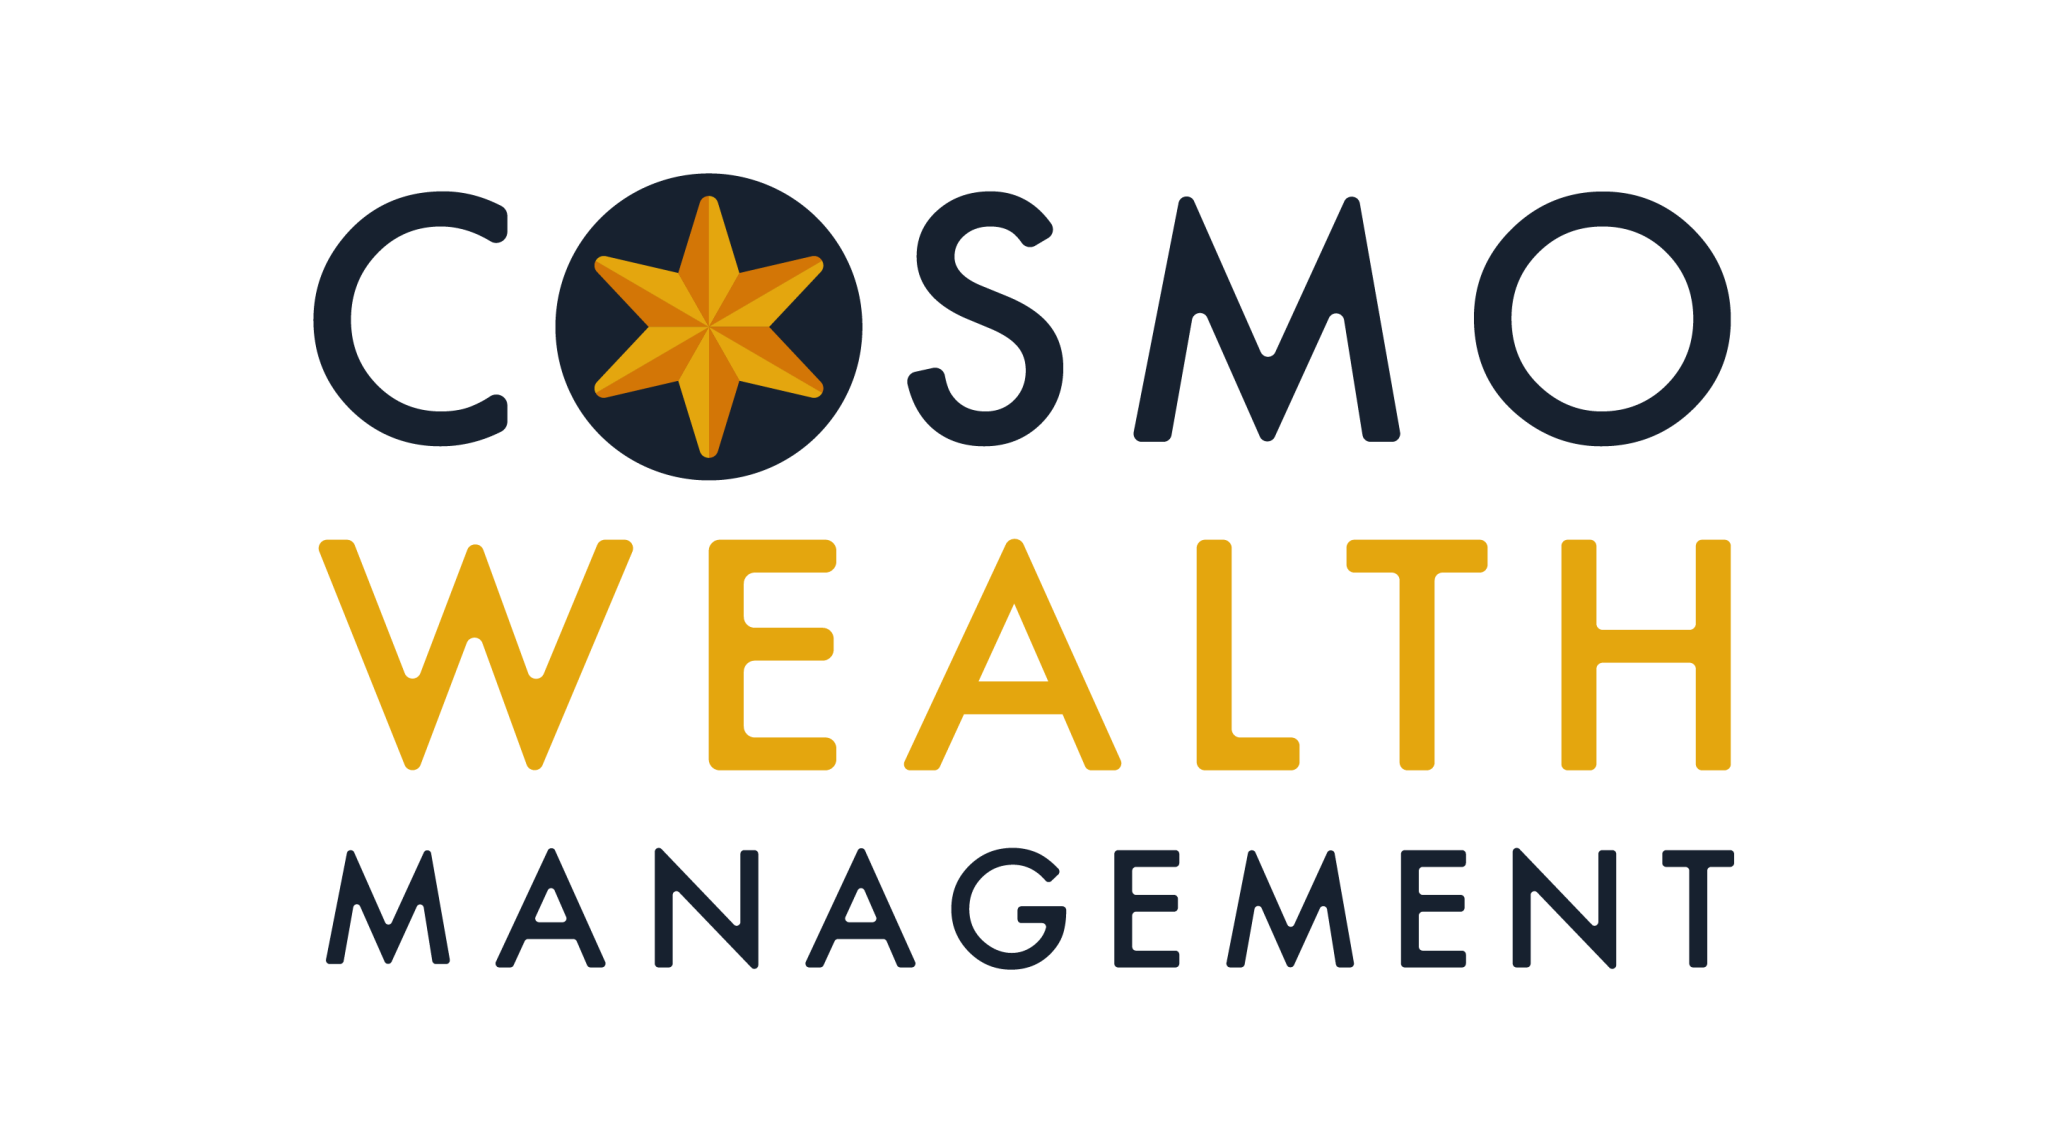 Cosmo Wealth – Cash out or roll over